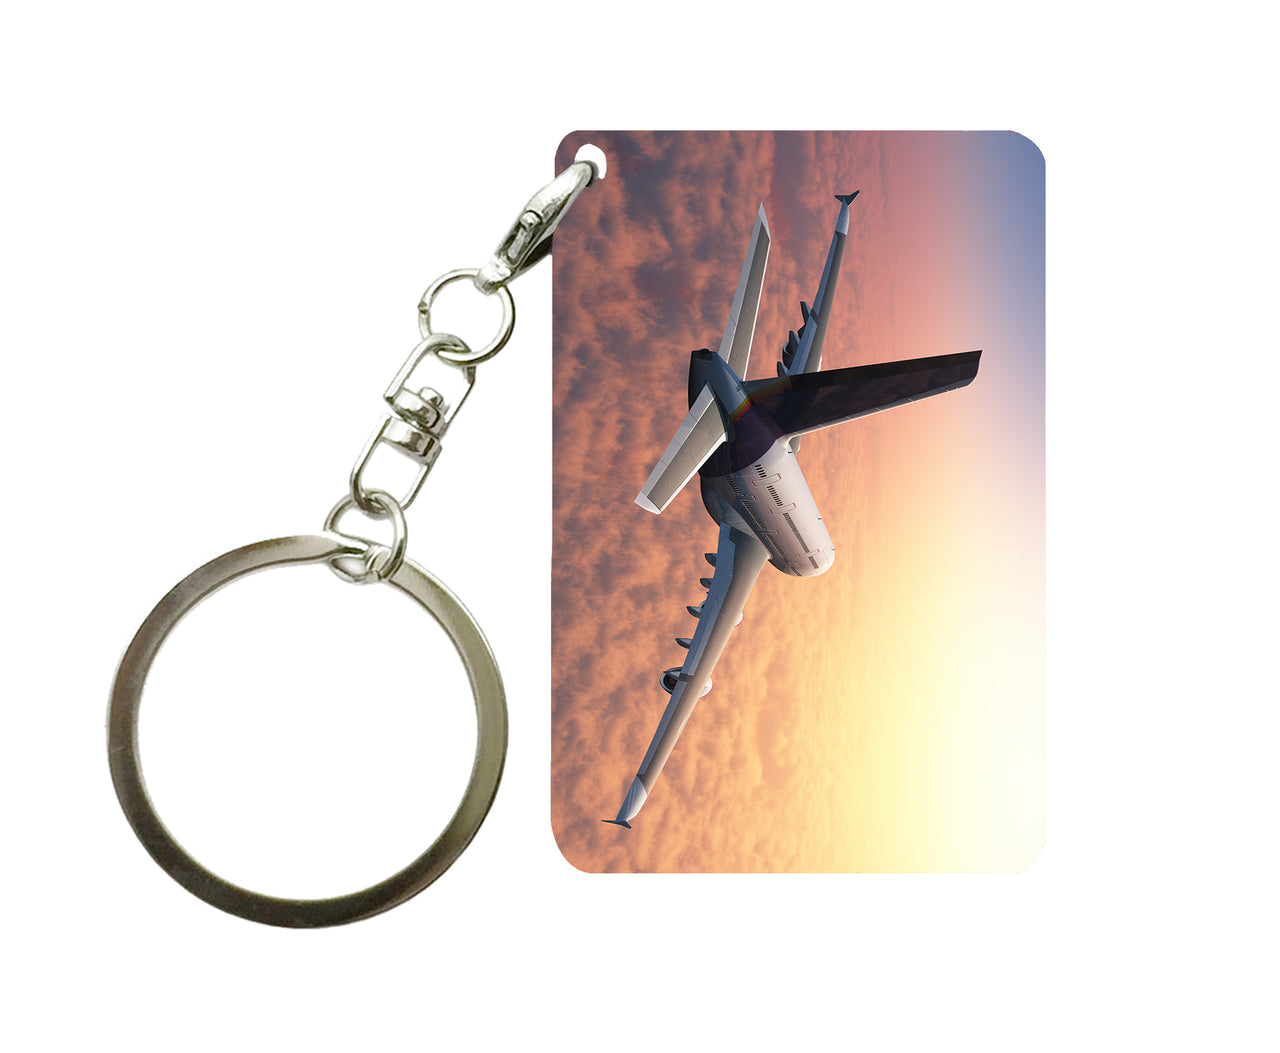 Super Cruising Airbus A380 over Clouds Designed Key Chains